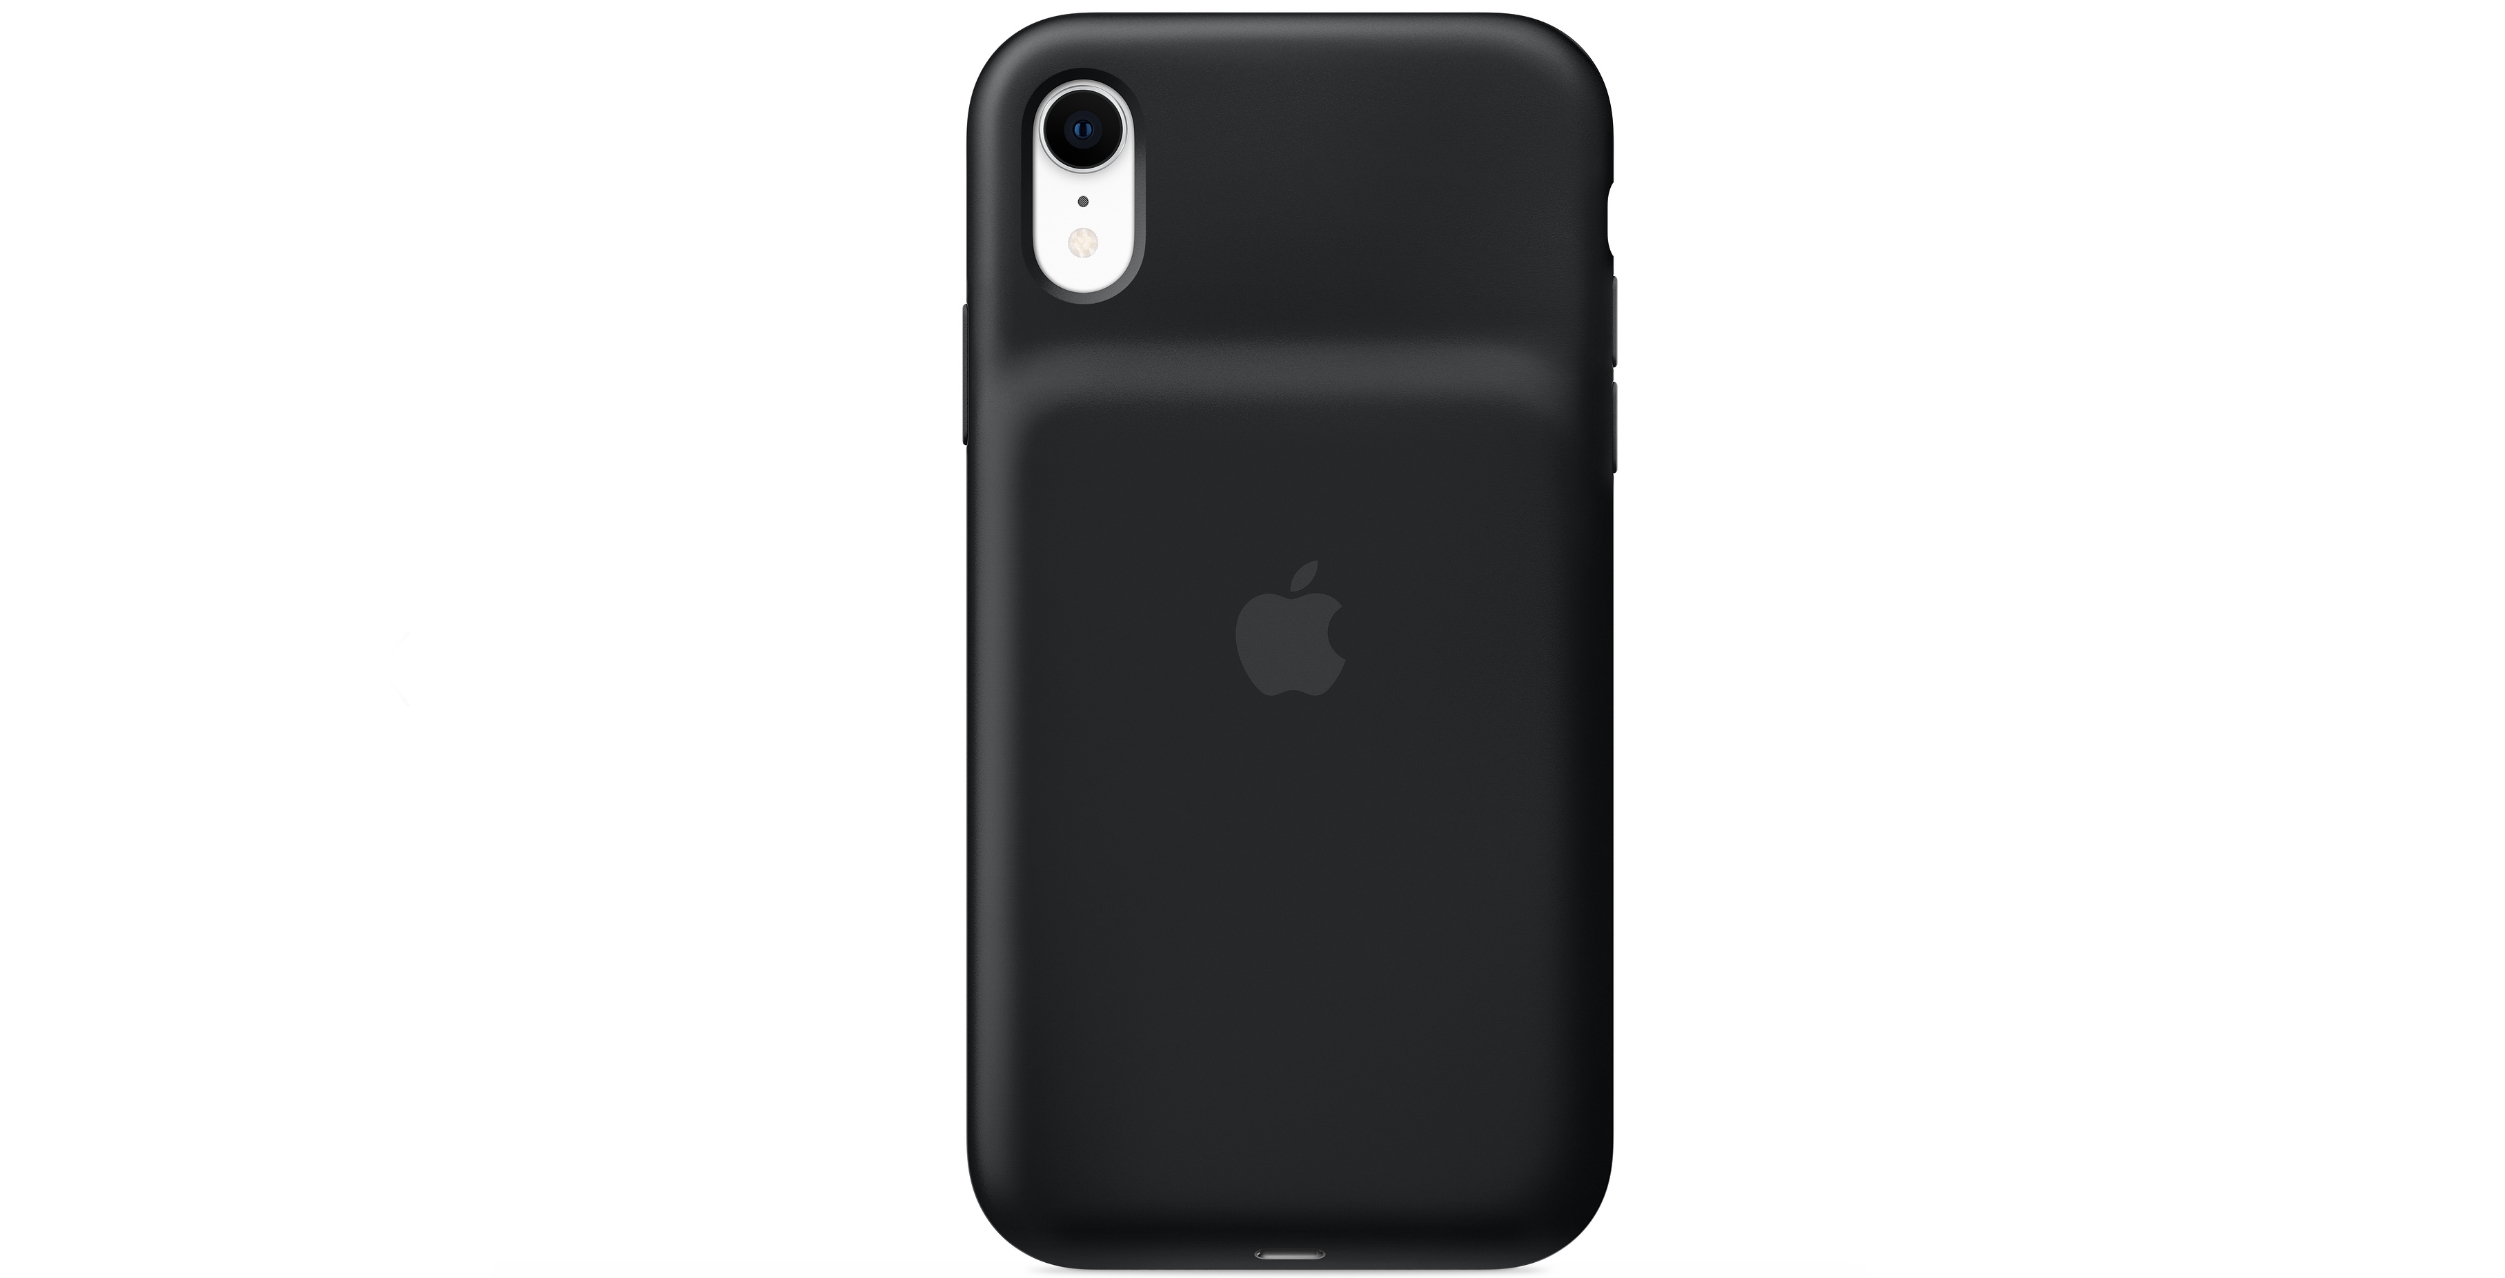 iPhone XS Smart Battery Case